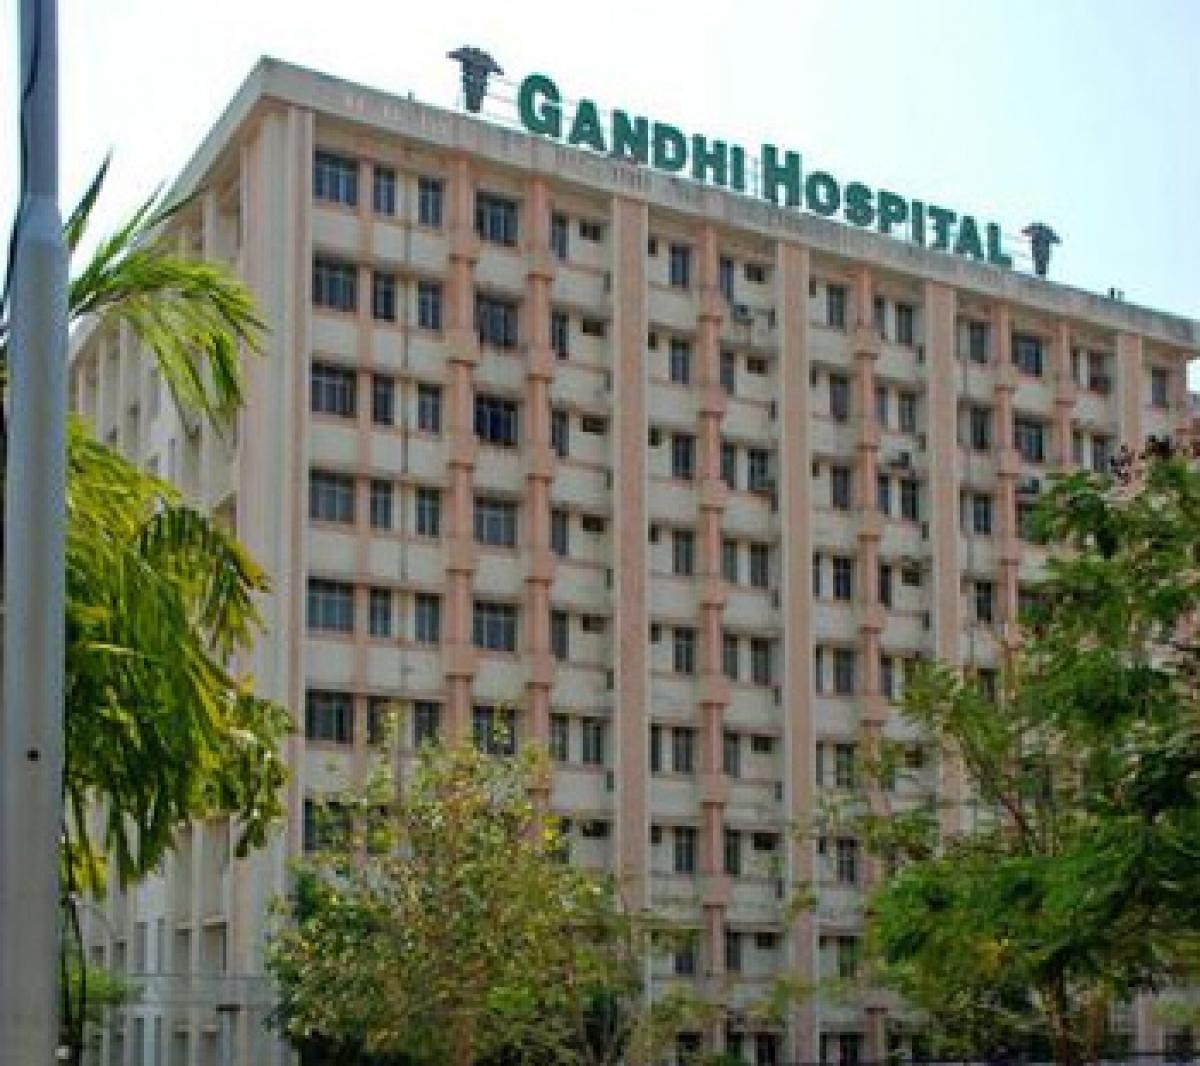 No donor from Gandhi Hospital yet